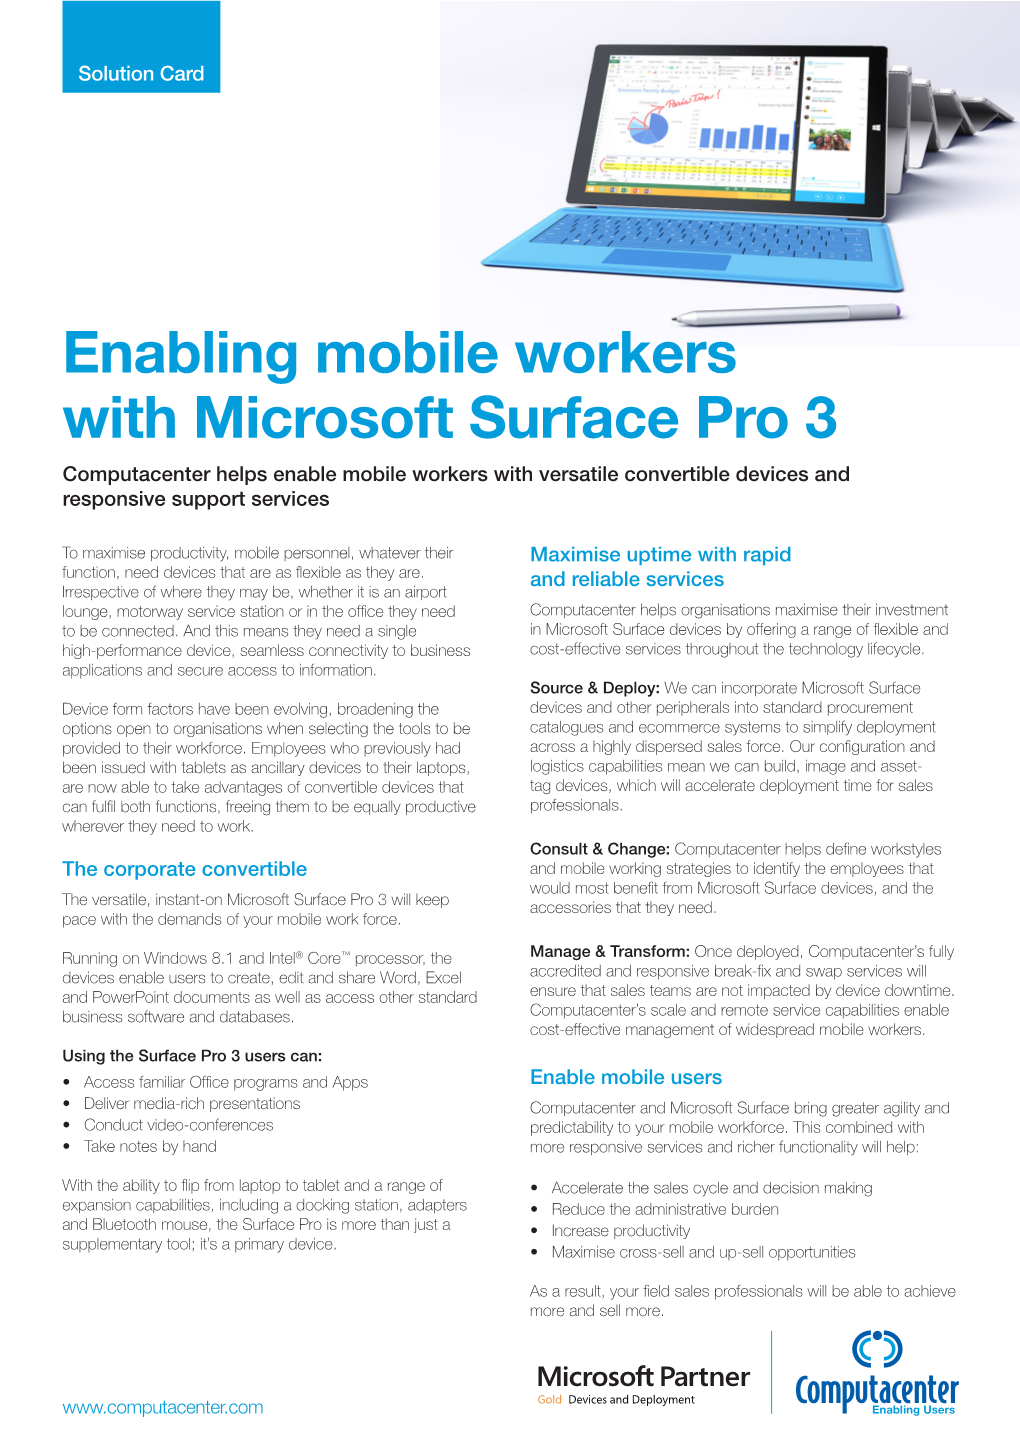 Enabling Mobile Workers with Microsoft Surface Pro 3 Computacenter Helps Enable Mobile Workers with Versatile Convertible Devices and Responsive Support Services